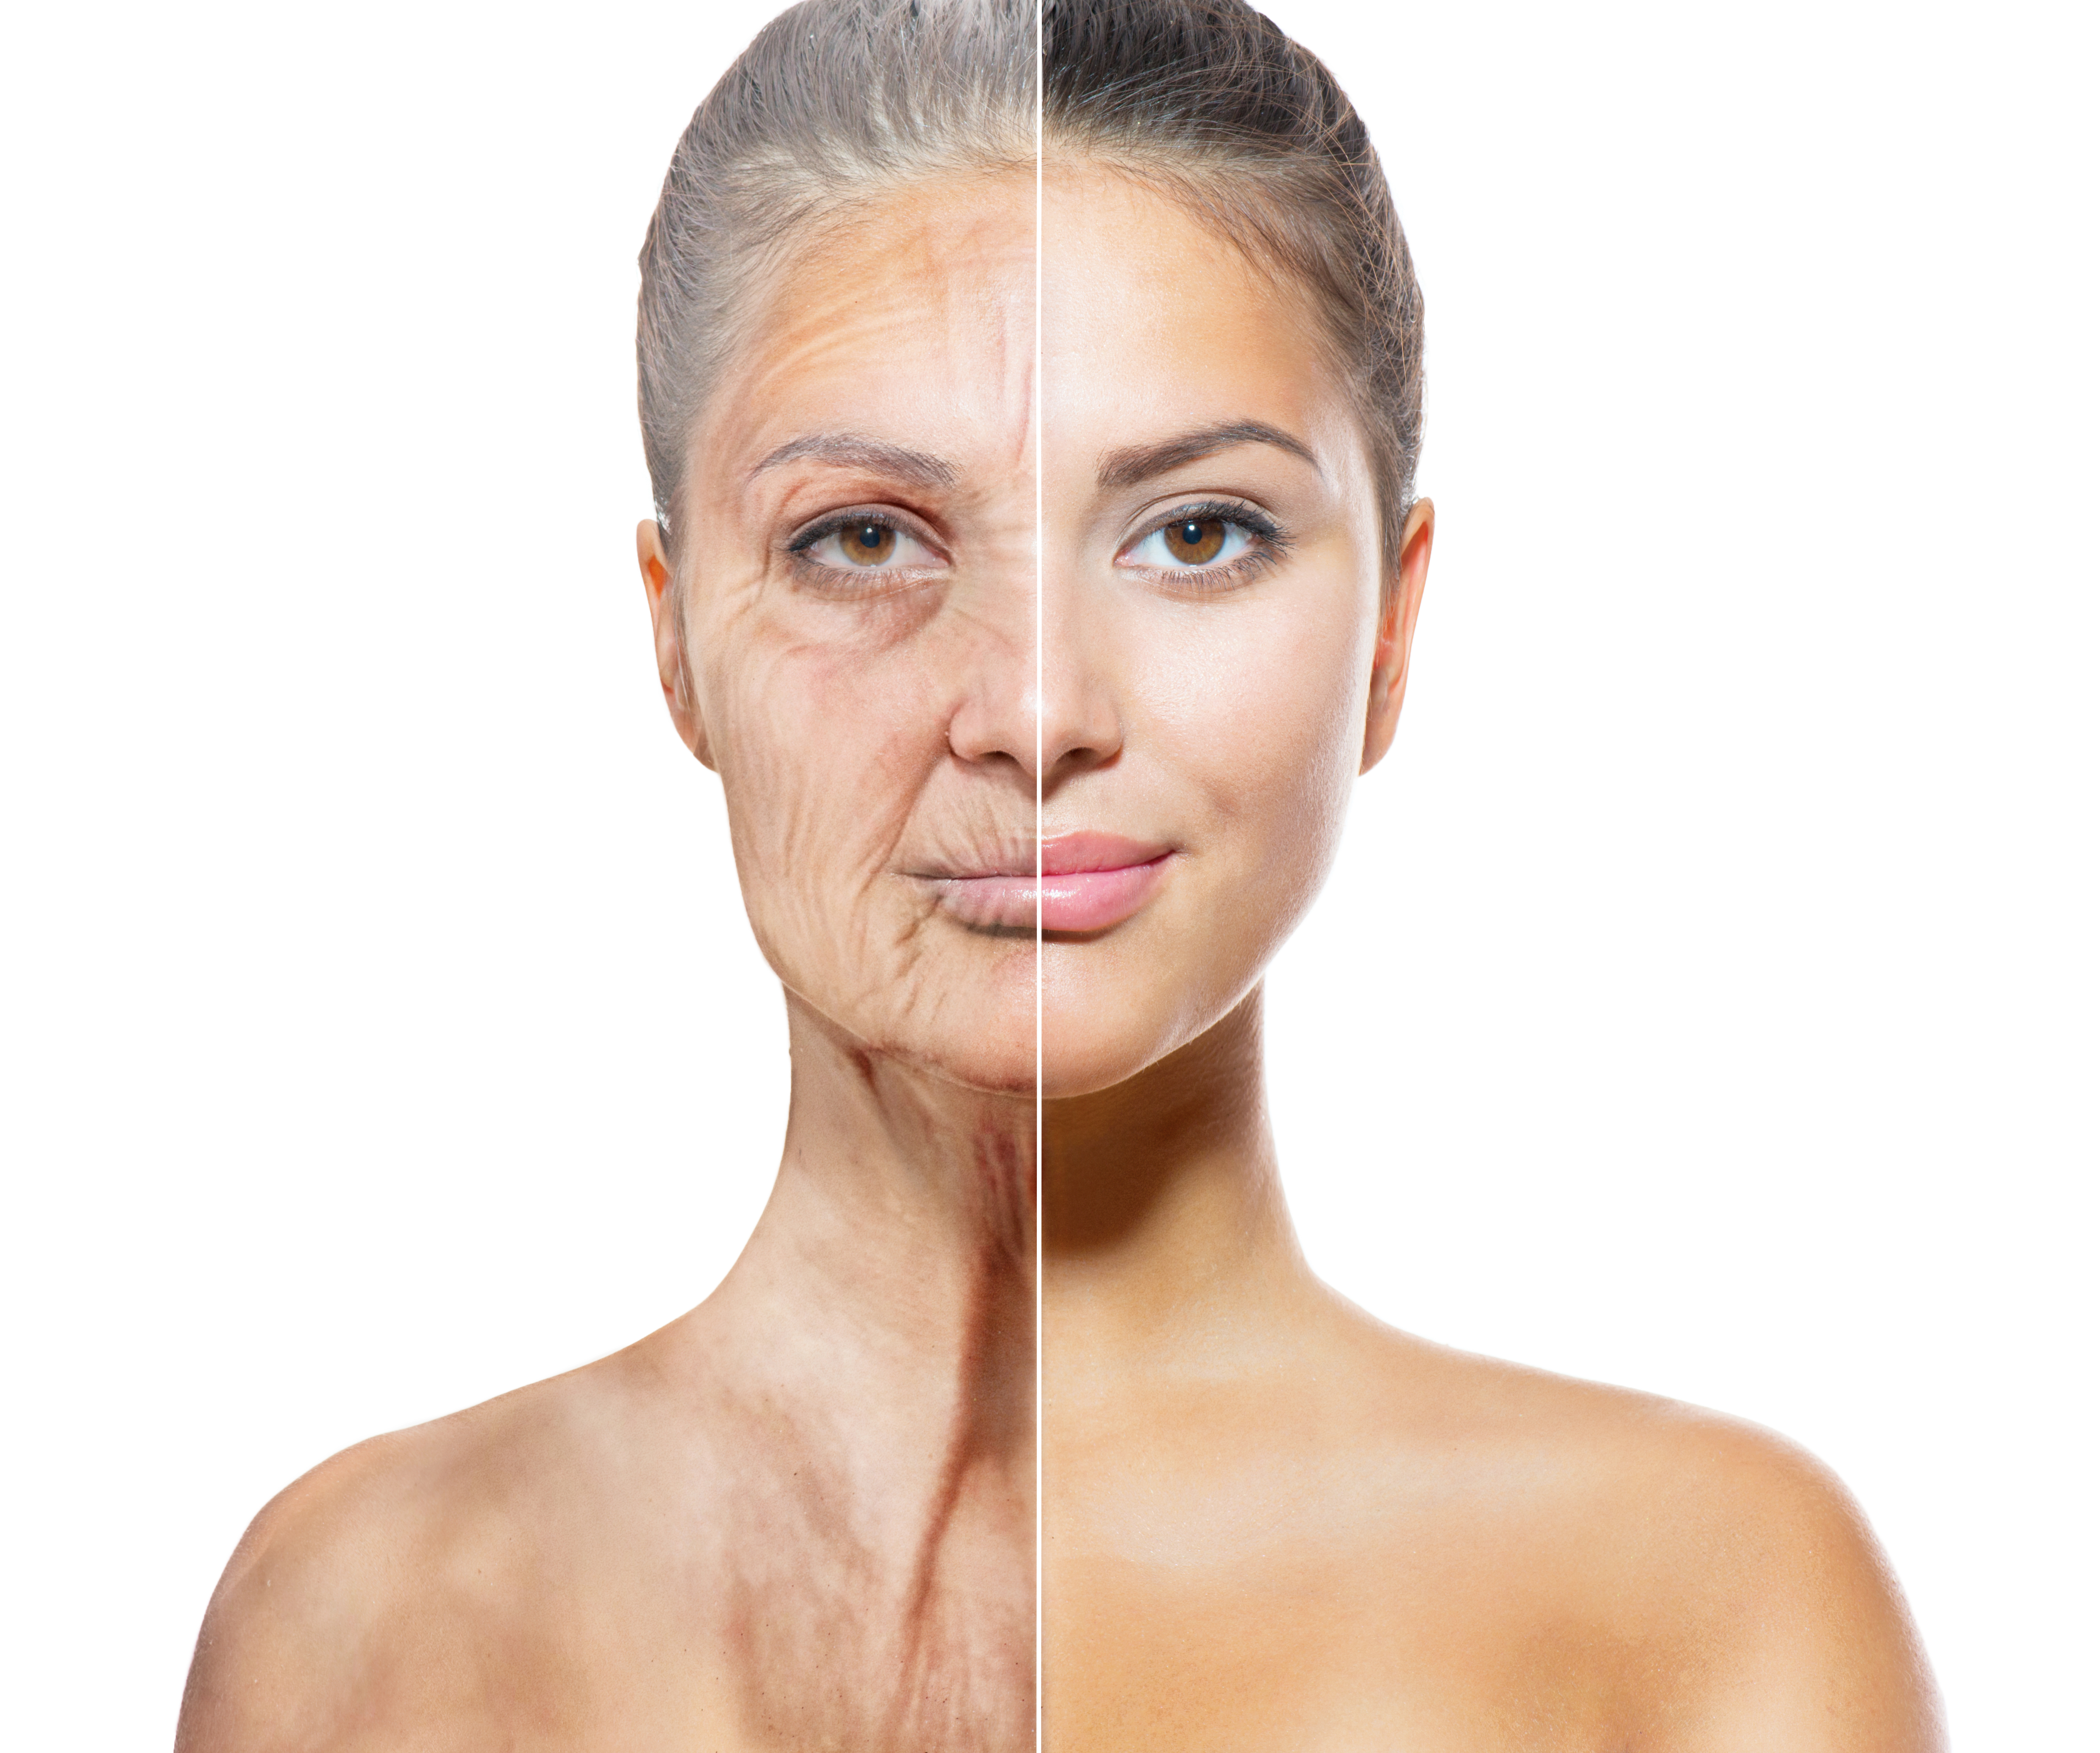 Aging and Skincare Concept. Faces of Young and Old Women